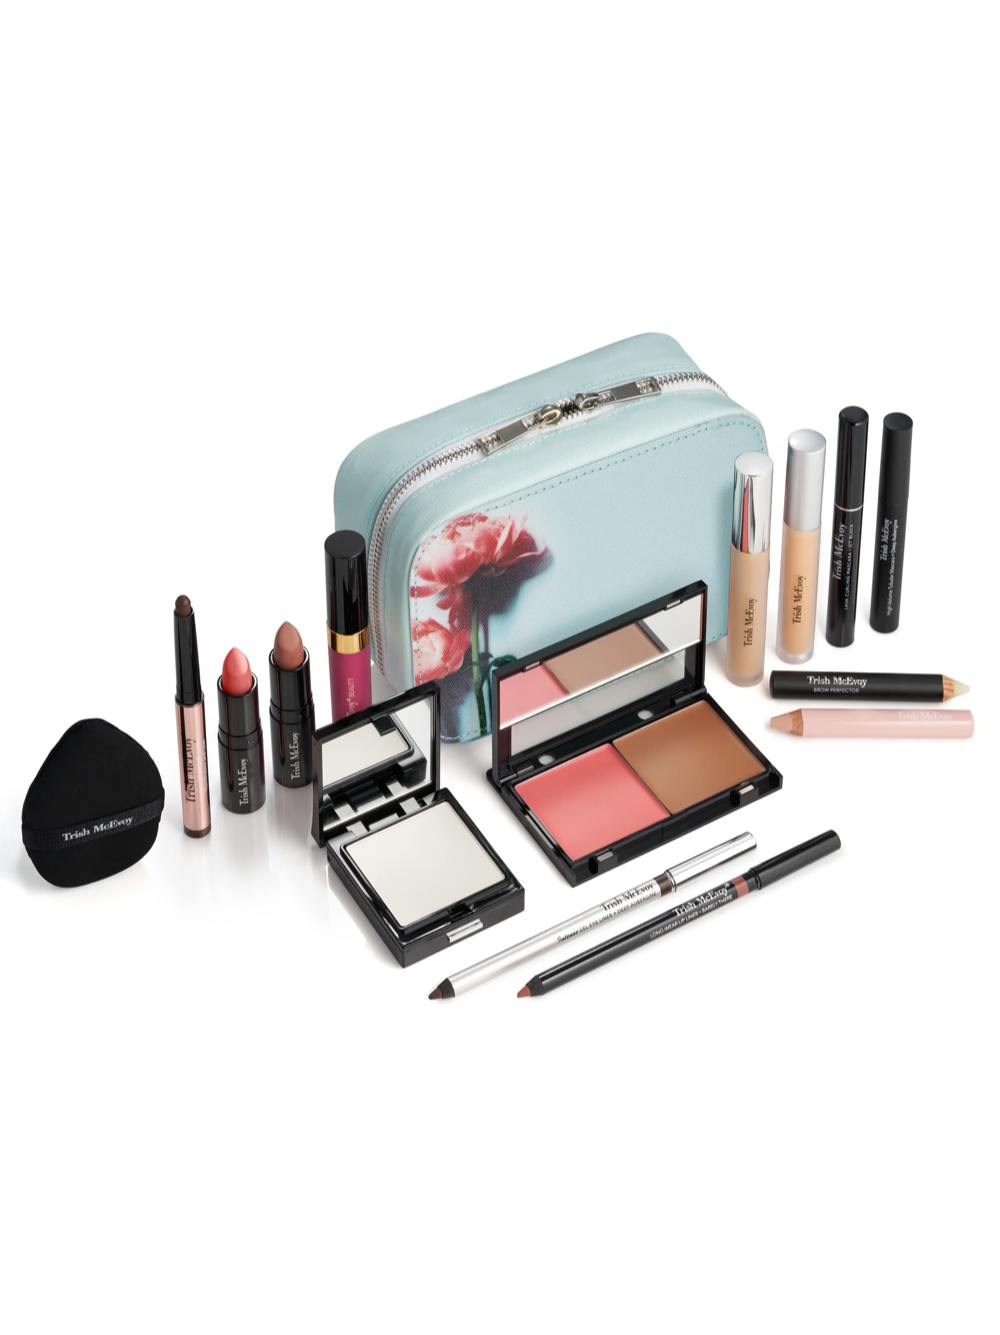 Trish McEvoy Limited Edition So Pretty Makeup Planner in Bloom